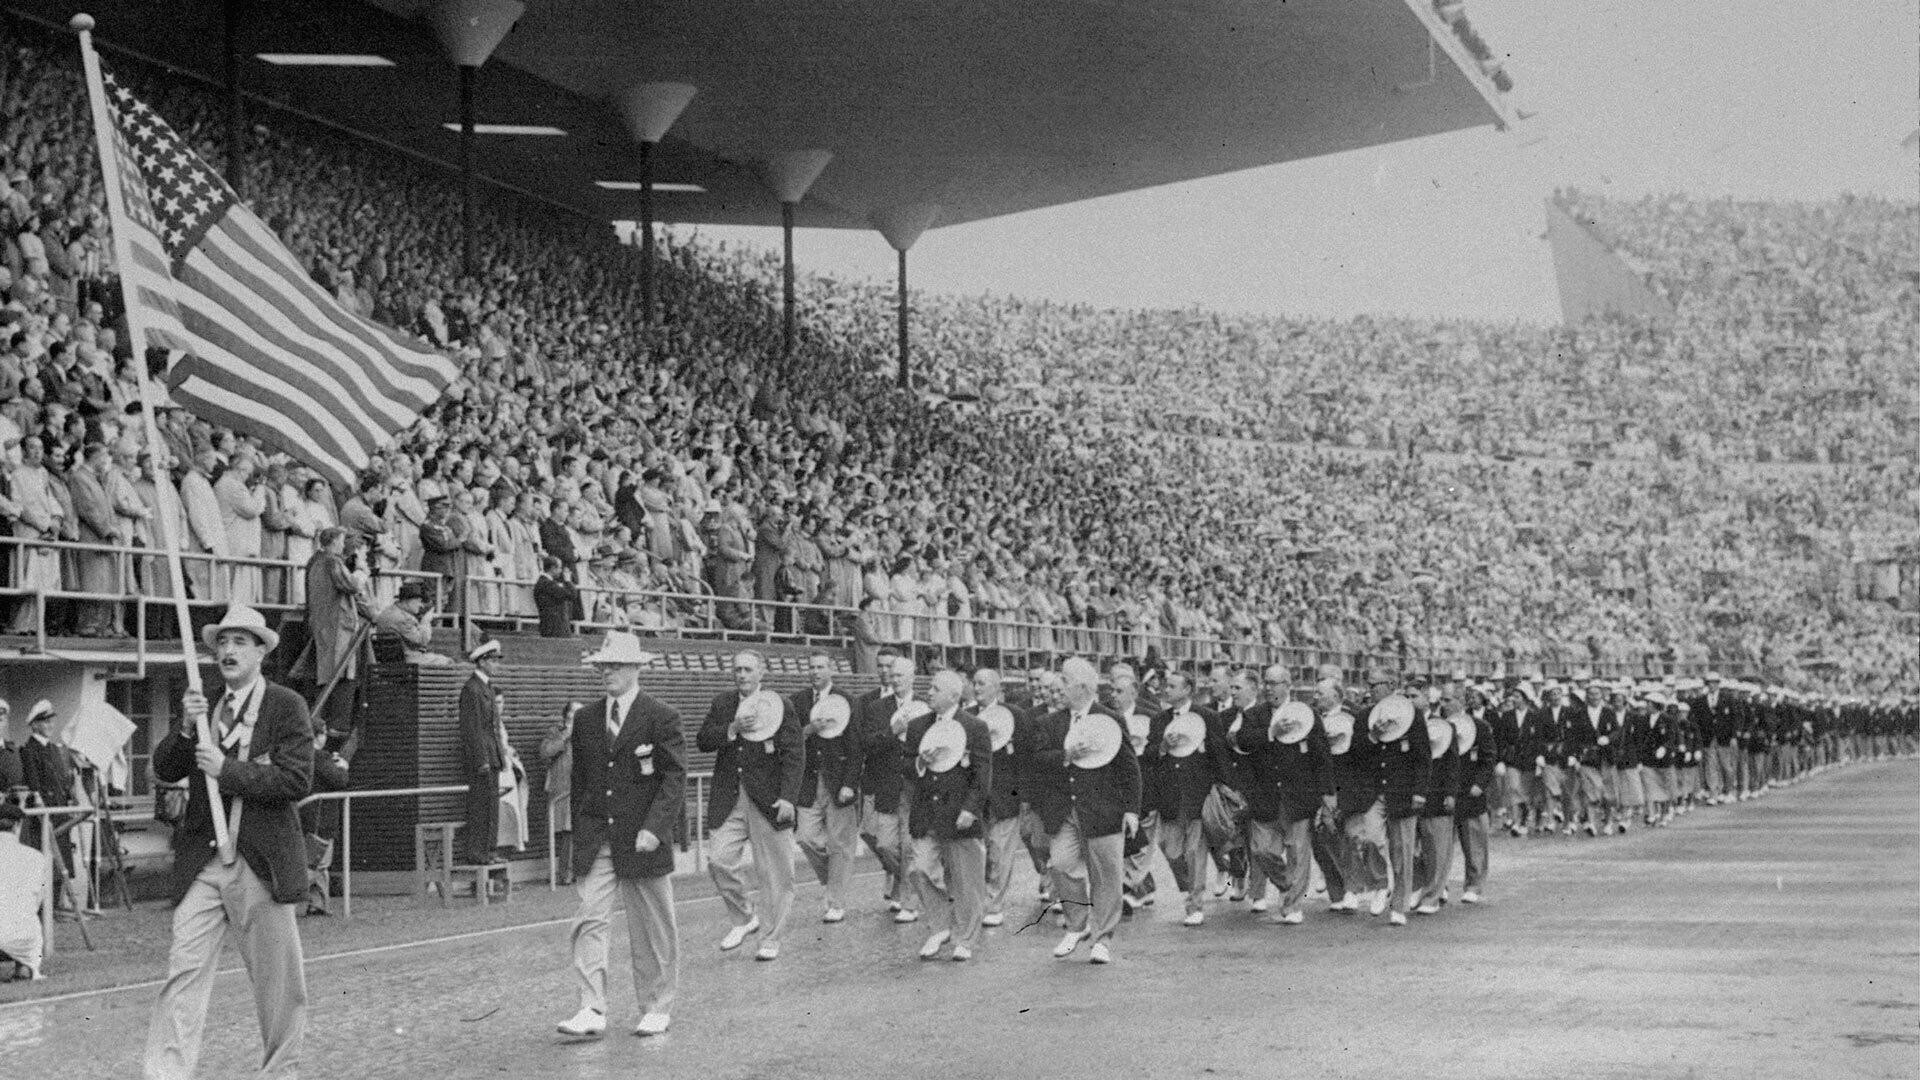 The United States delegation depilates in the Olympic stadium during the opening of the Olympic Games in Helsinki, Finland, on July 19, 1952. AP PHOTO.